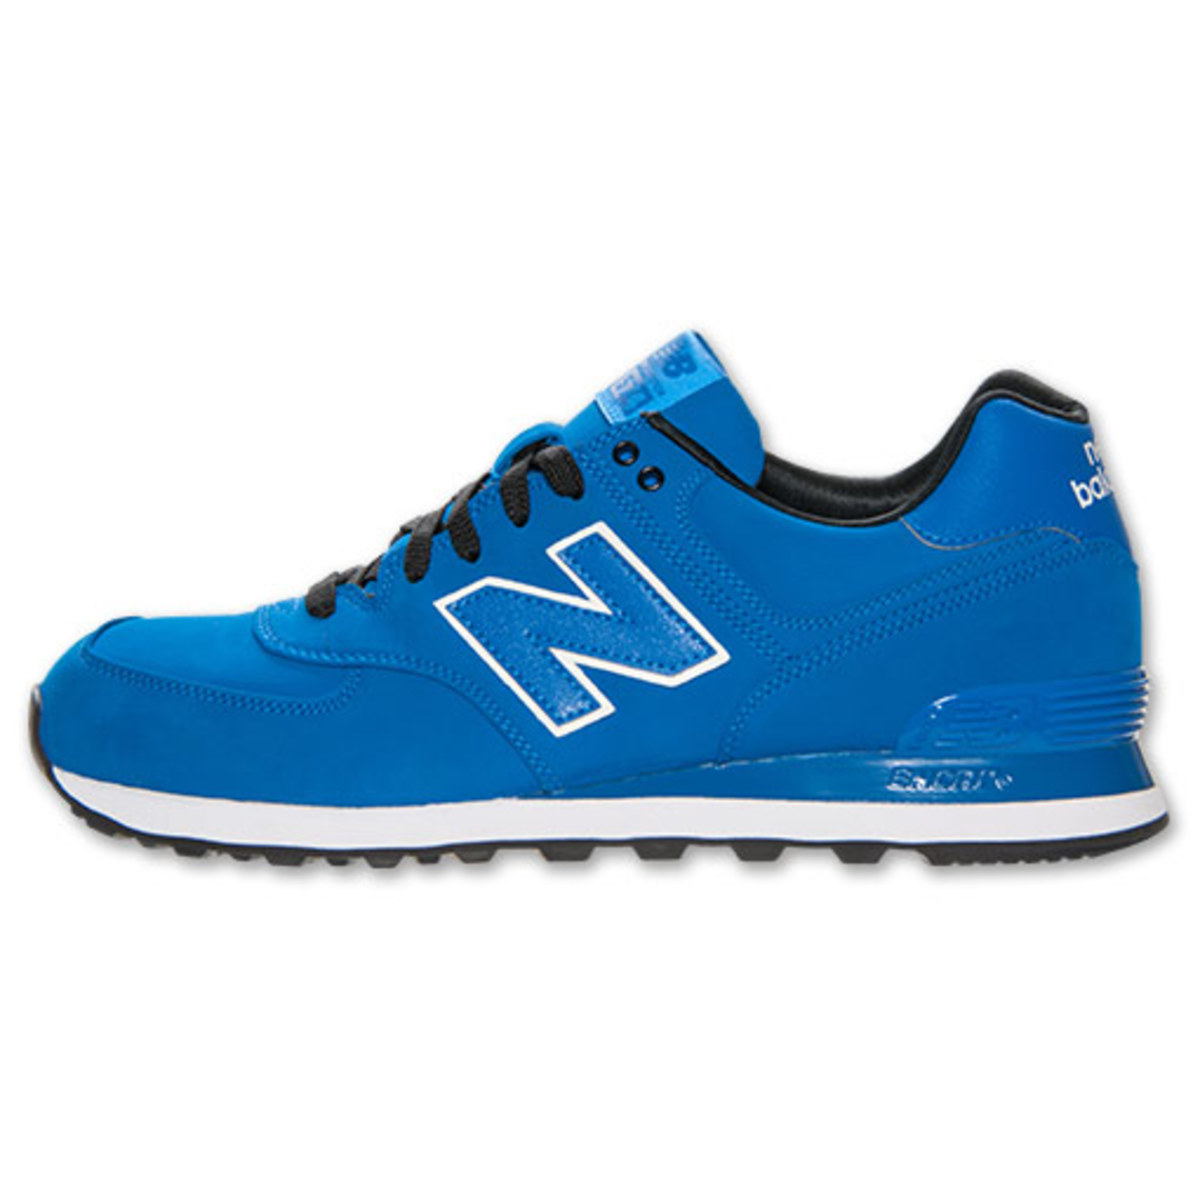 Kicks of the Day: New Balance 574 “Blue/White” | Complex